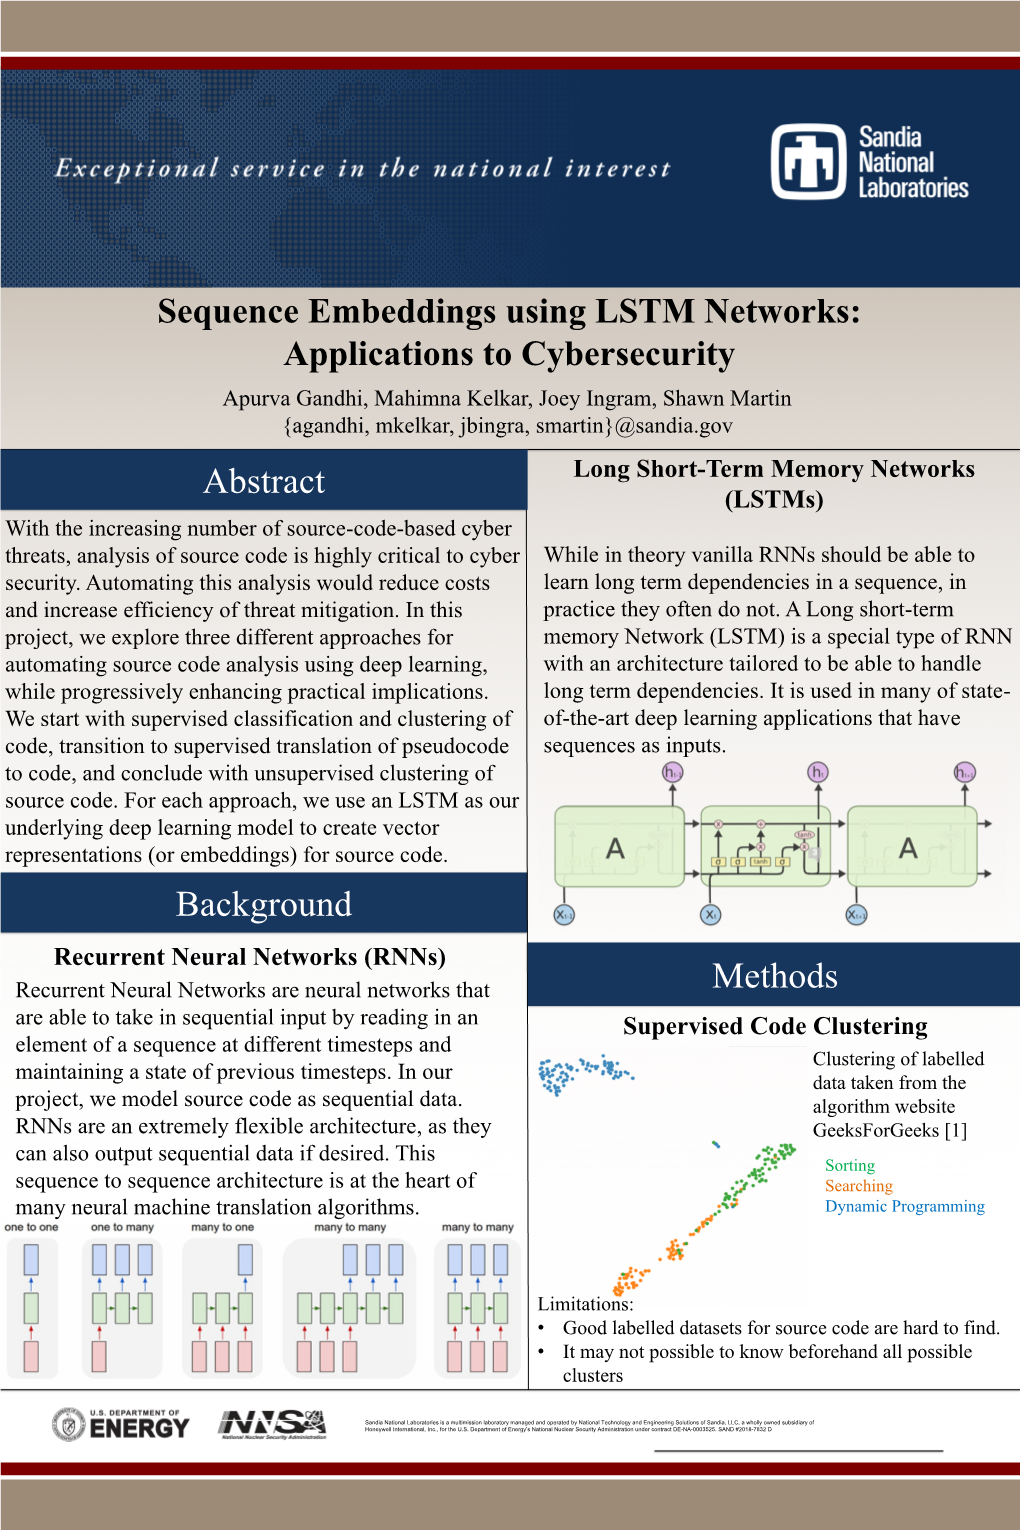 Sequence Embeddings Using LSTM Networks